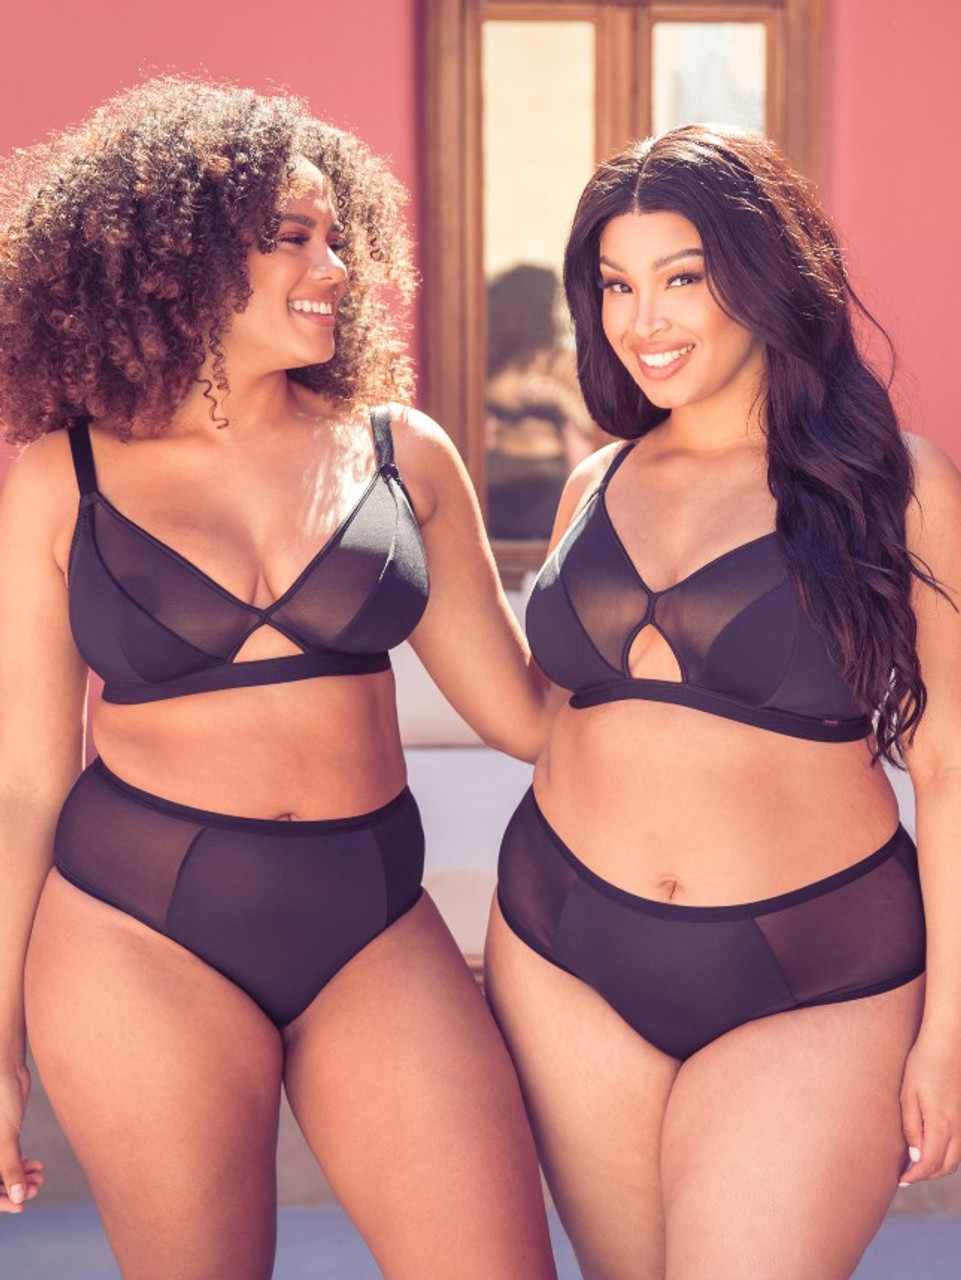 Curvy Kate Everyday Get Up & Chill Bralette - Black